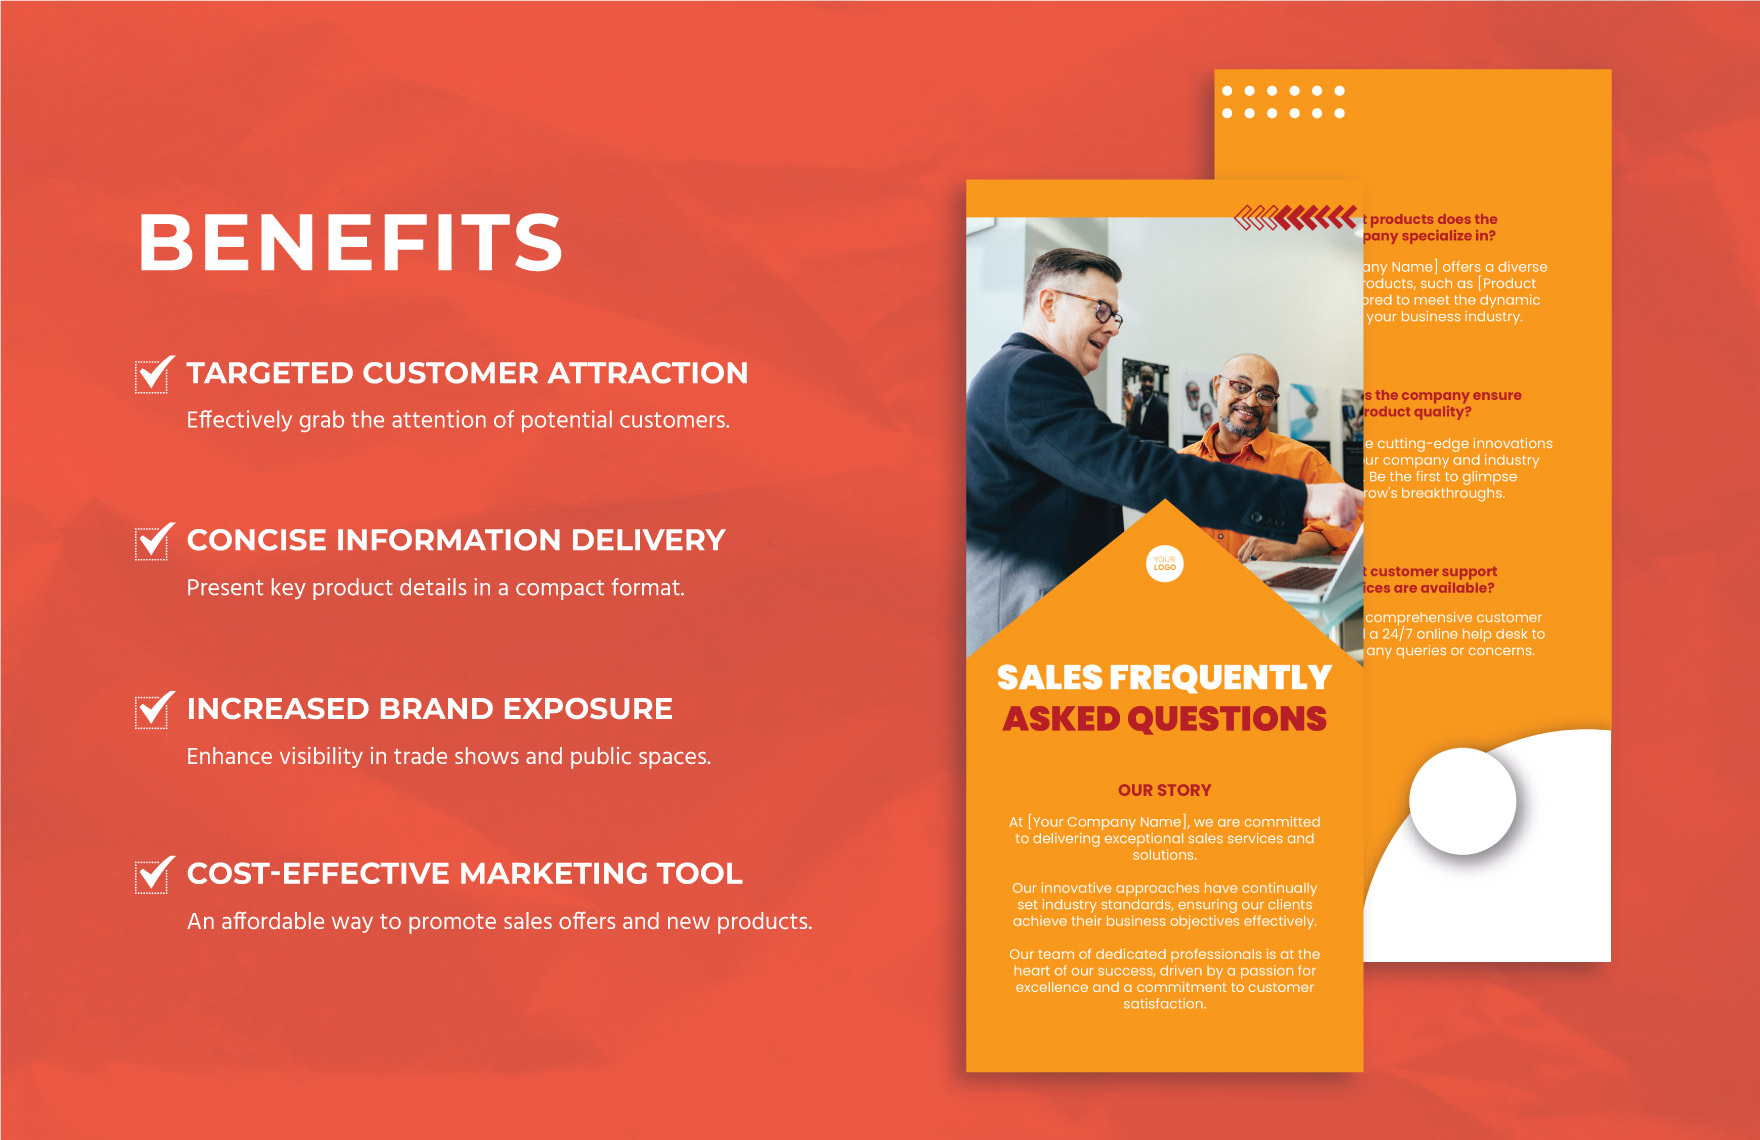 Sales Frequently Asked Questions Rack Card Template